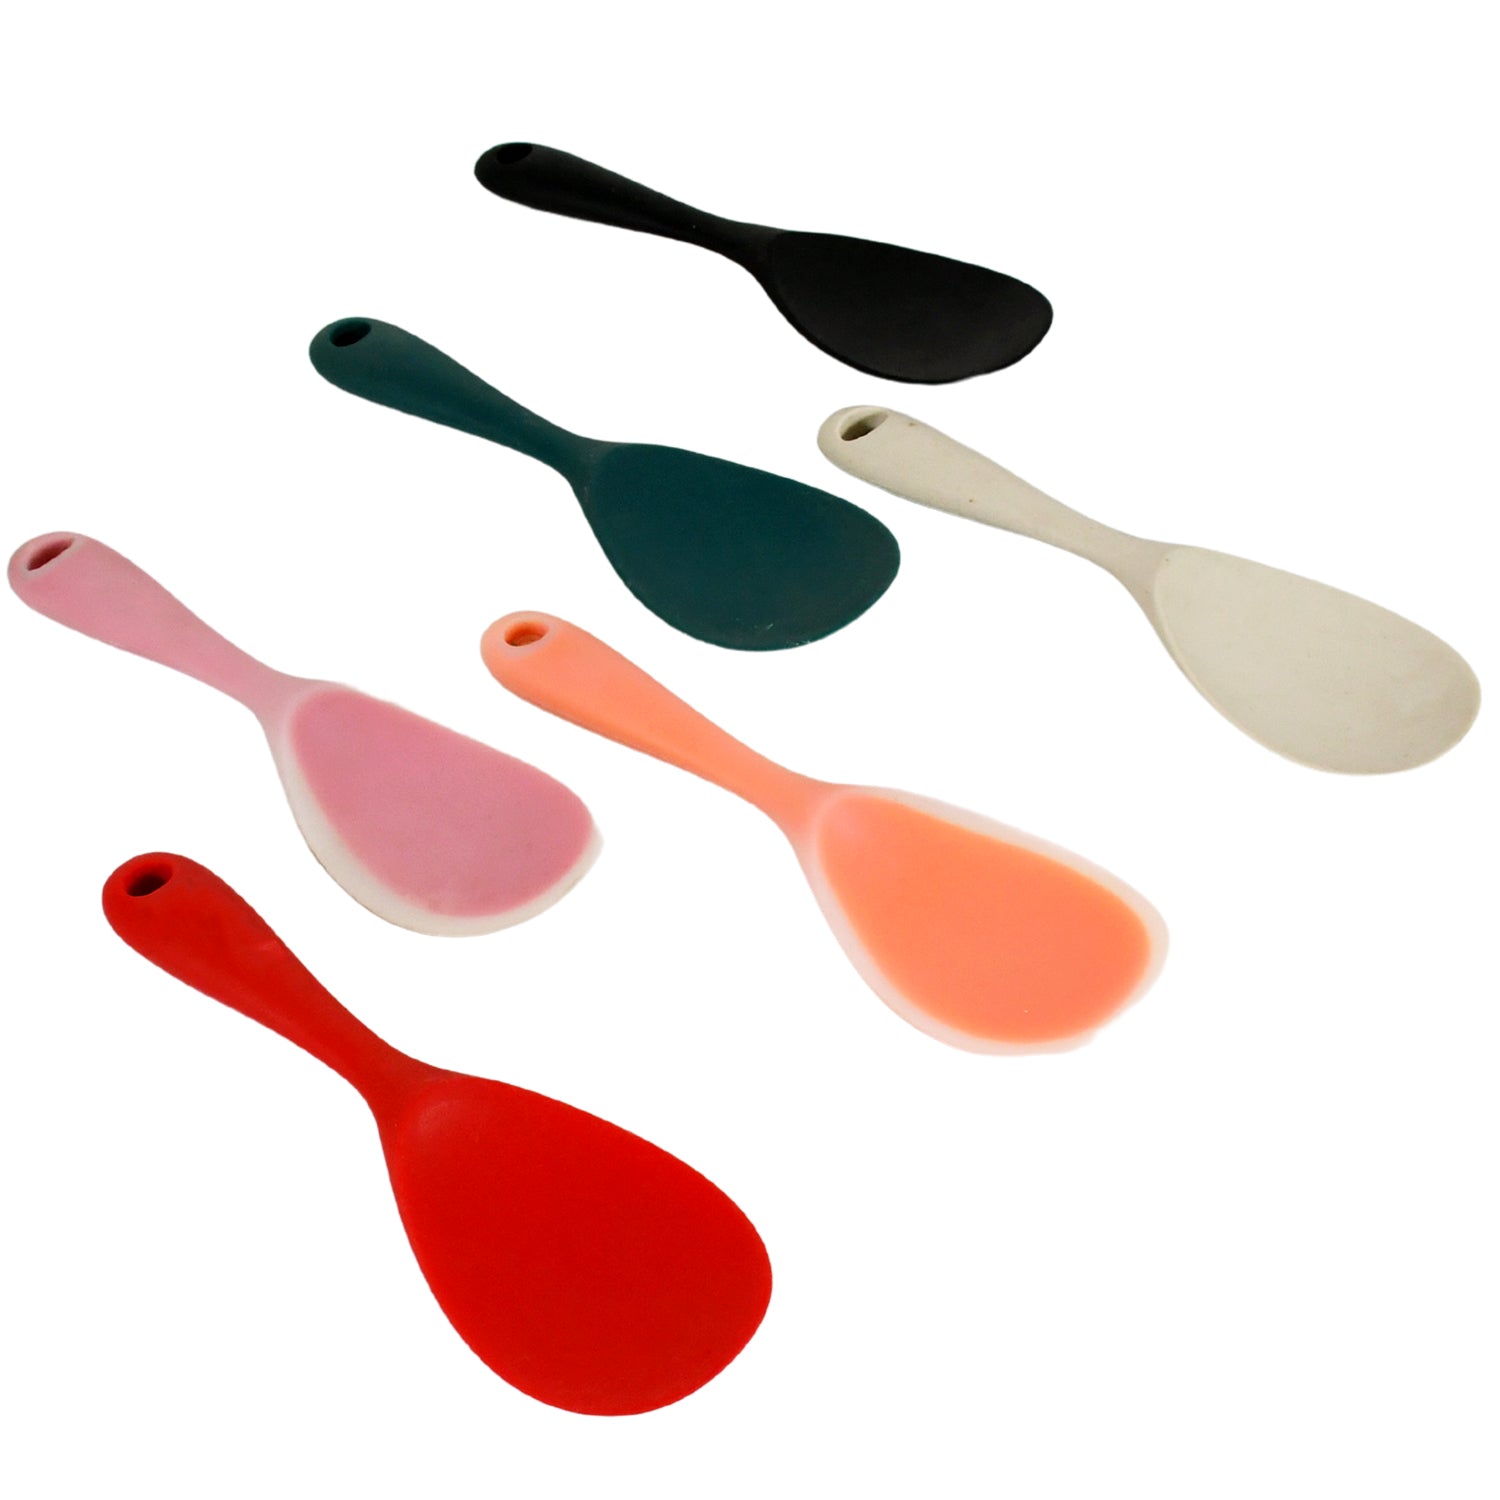 5620 Silicone Rice Paddle Spoon Non Stick Rice Spoon Heat-Resistant Kitchen Gadge Rice Spoon with Hanging Hole Perfect for Rice Mashed Potato (6 pcs set / 22 cm)